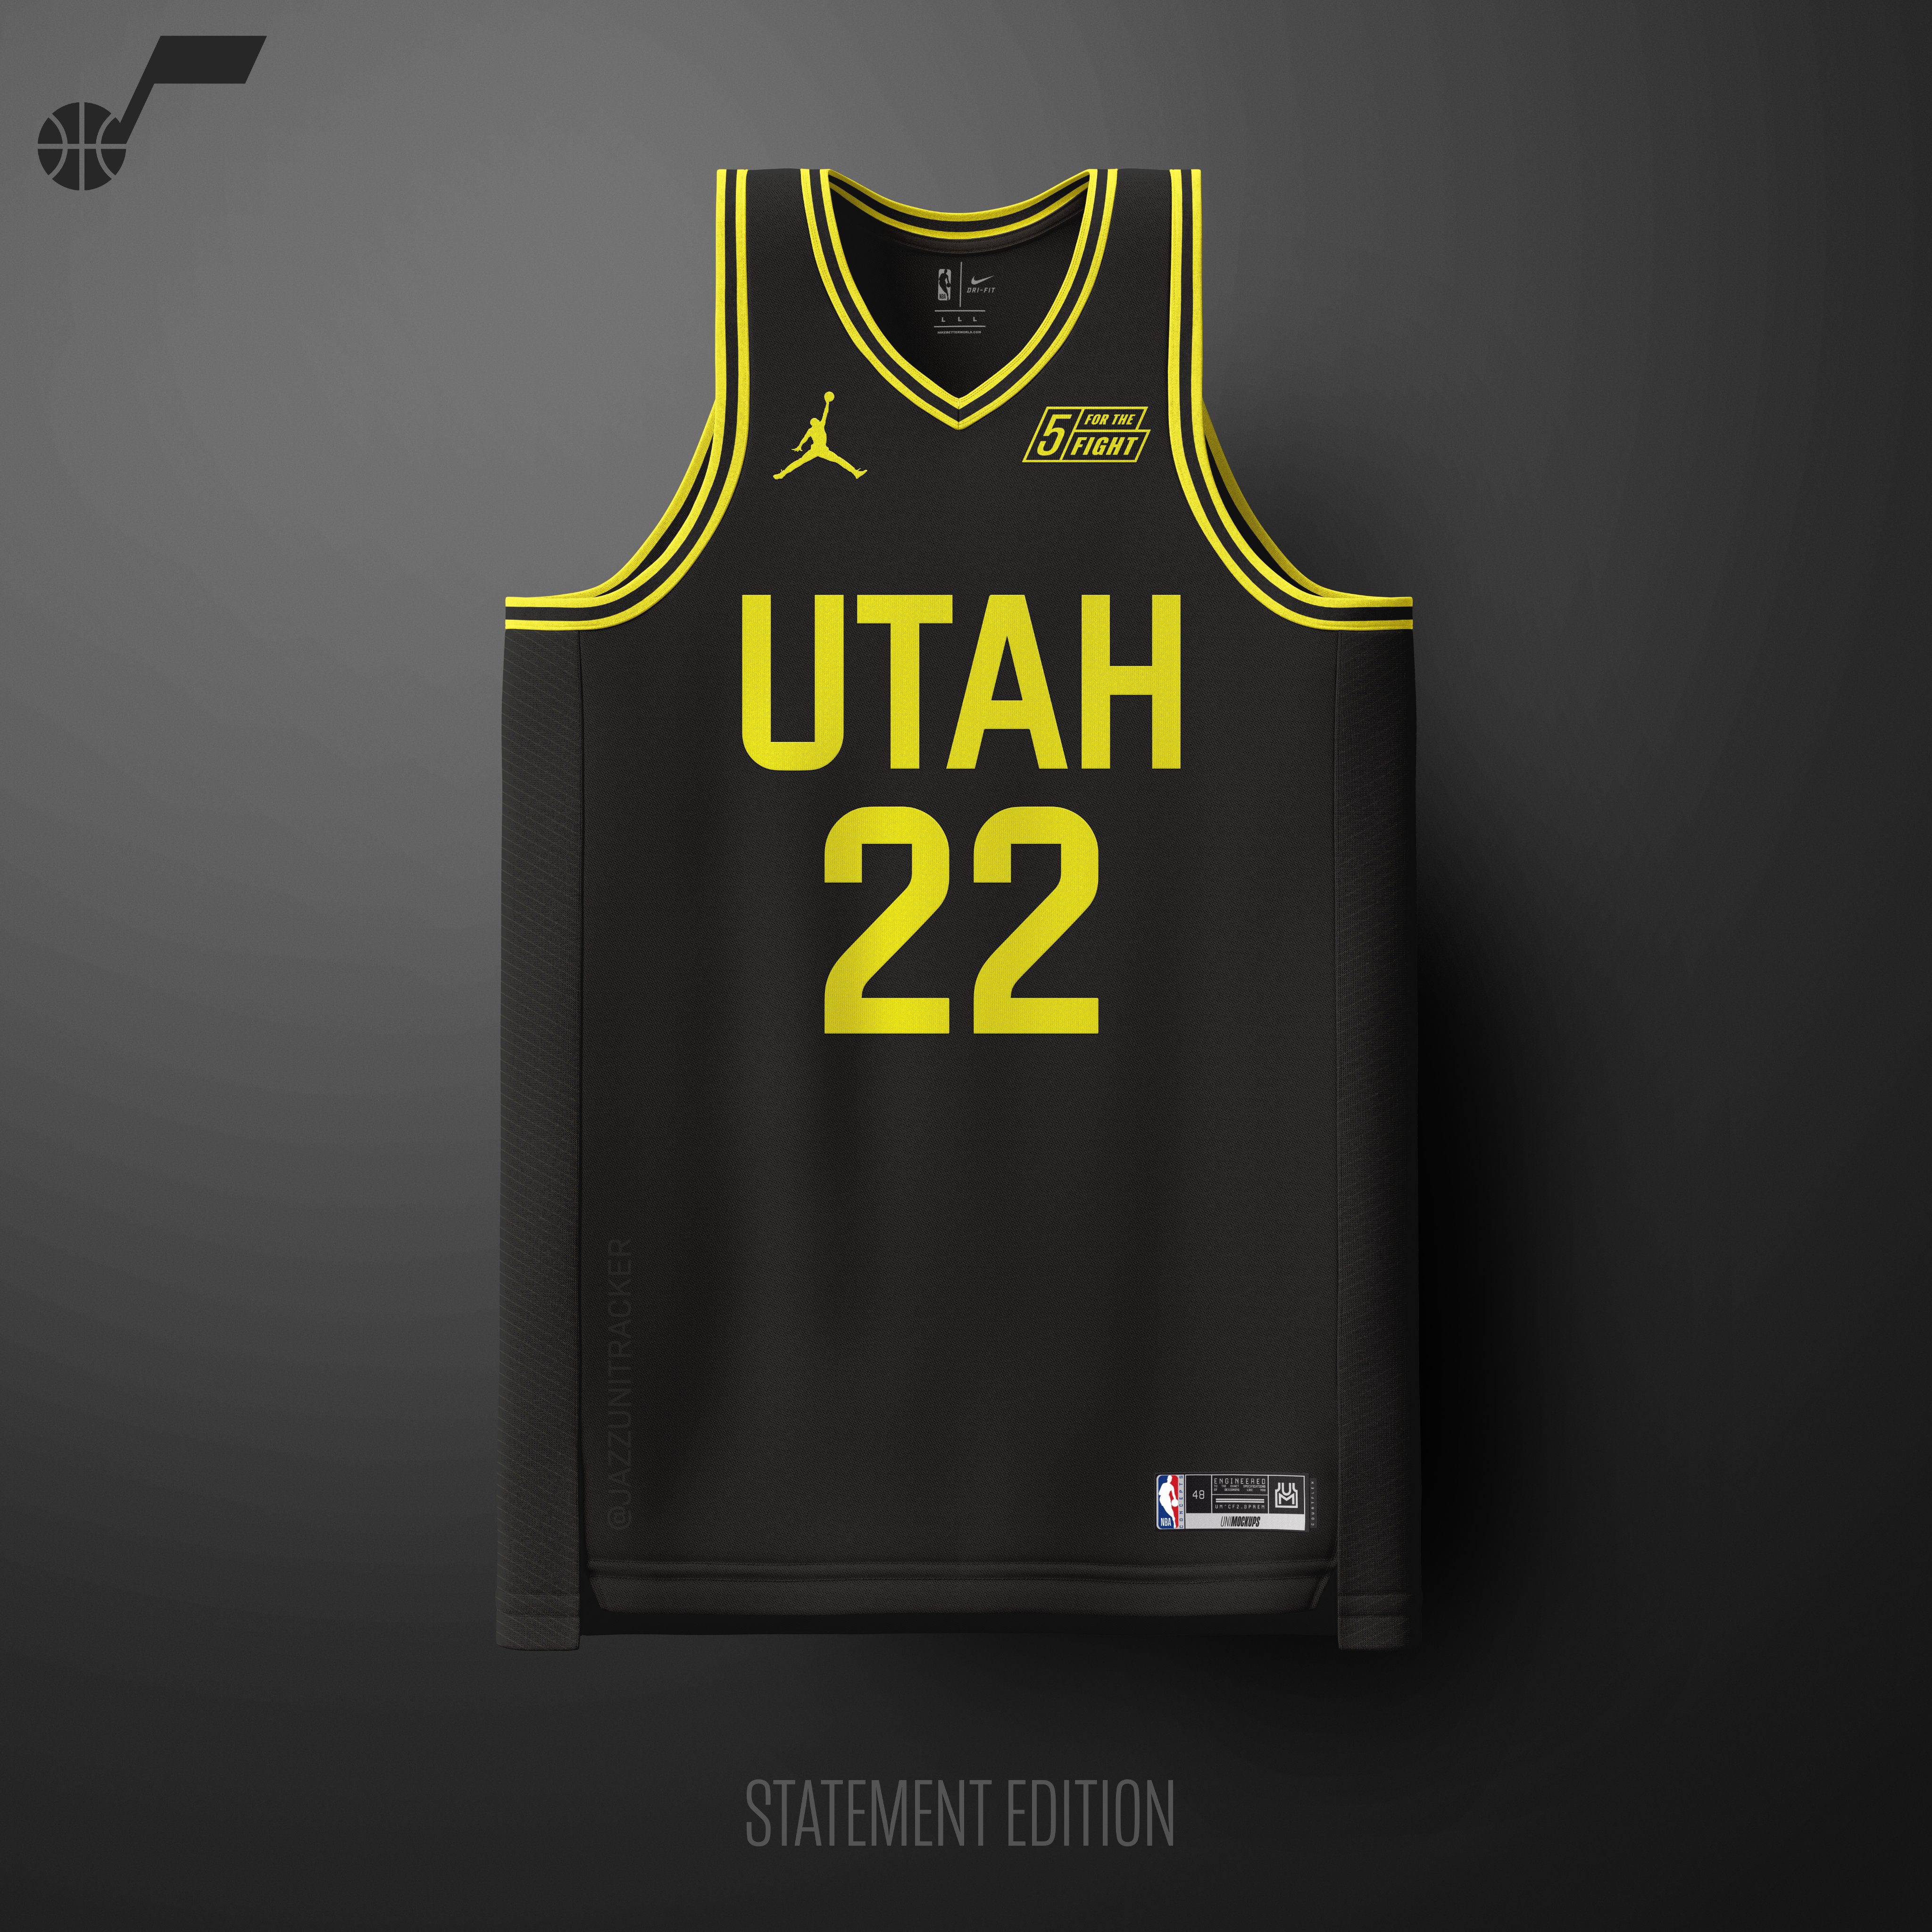 A couple Jazz uniform mock-ups based on the recent rumors of a